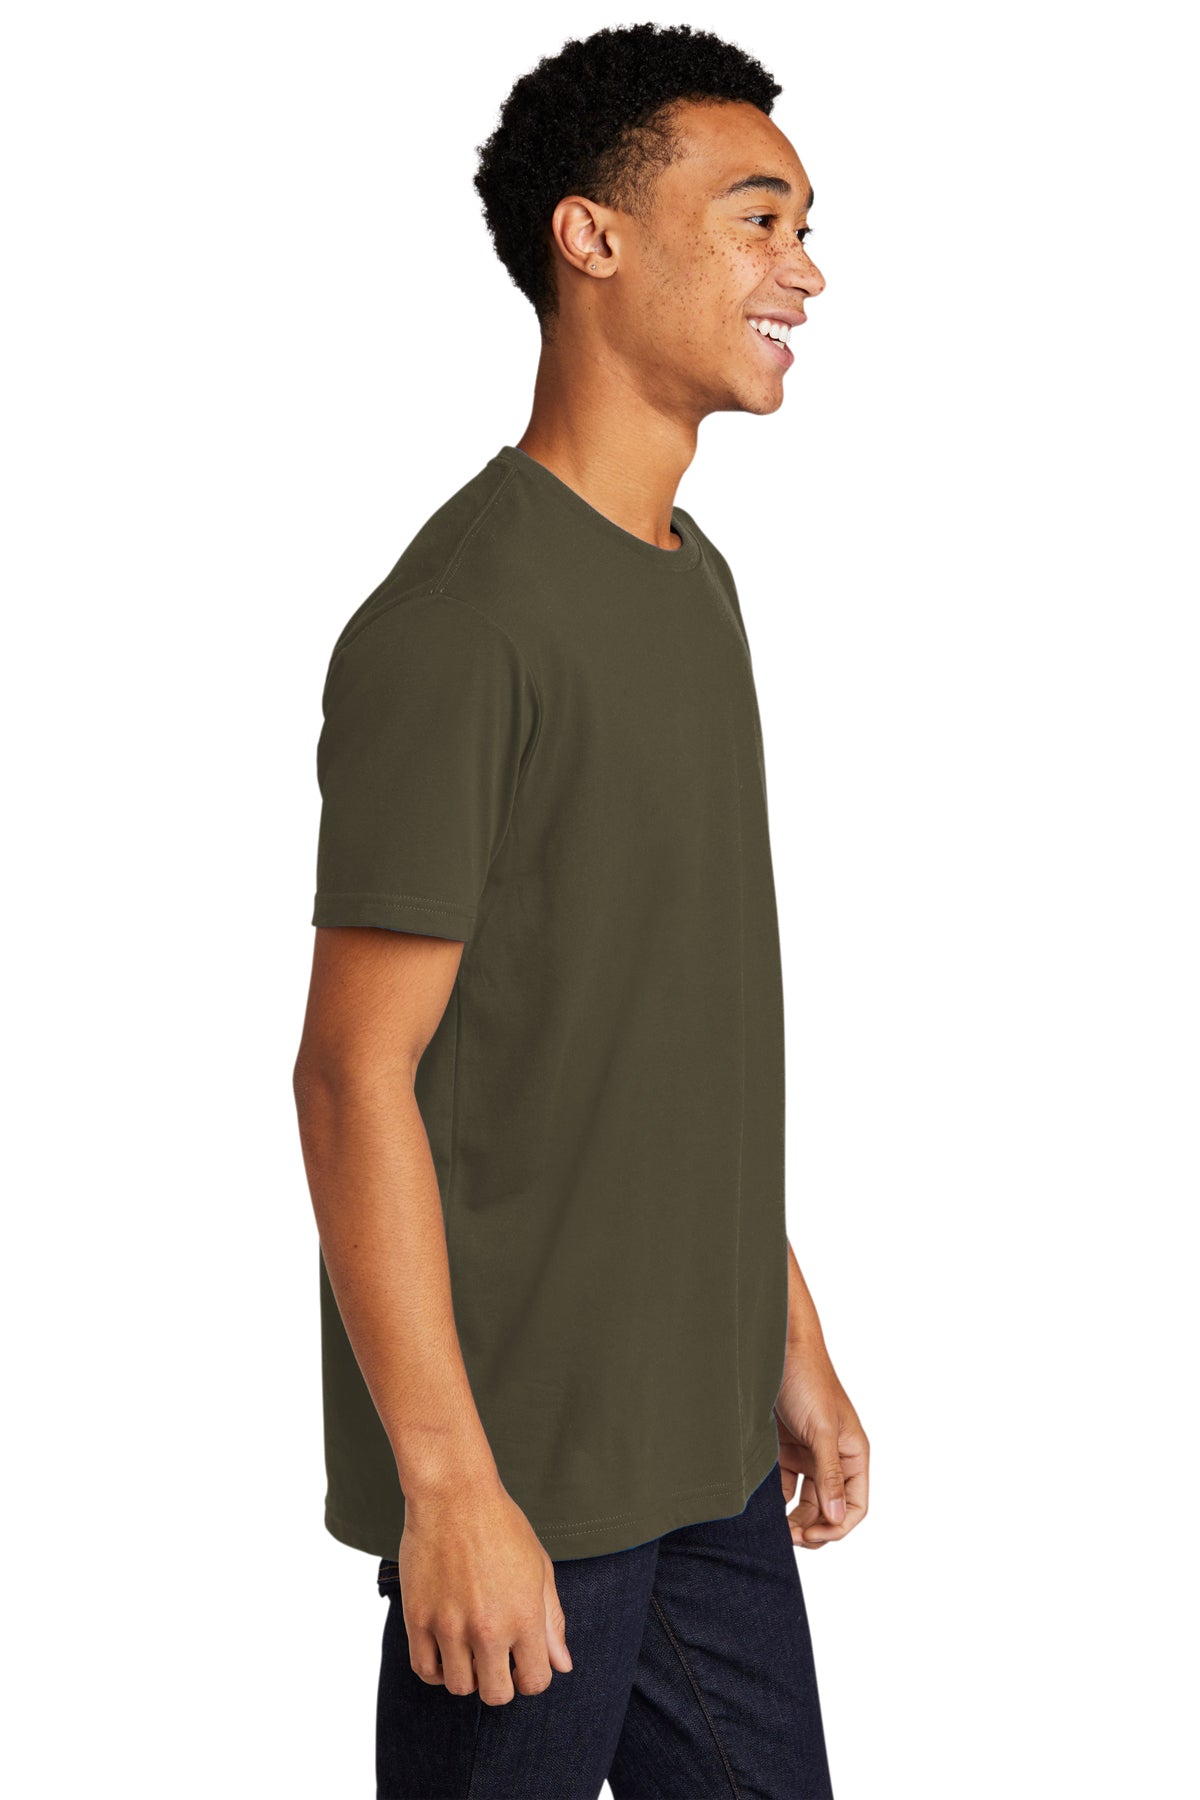 Next Level Unisex CVC Sueded Branded Tee's, Military Green